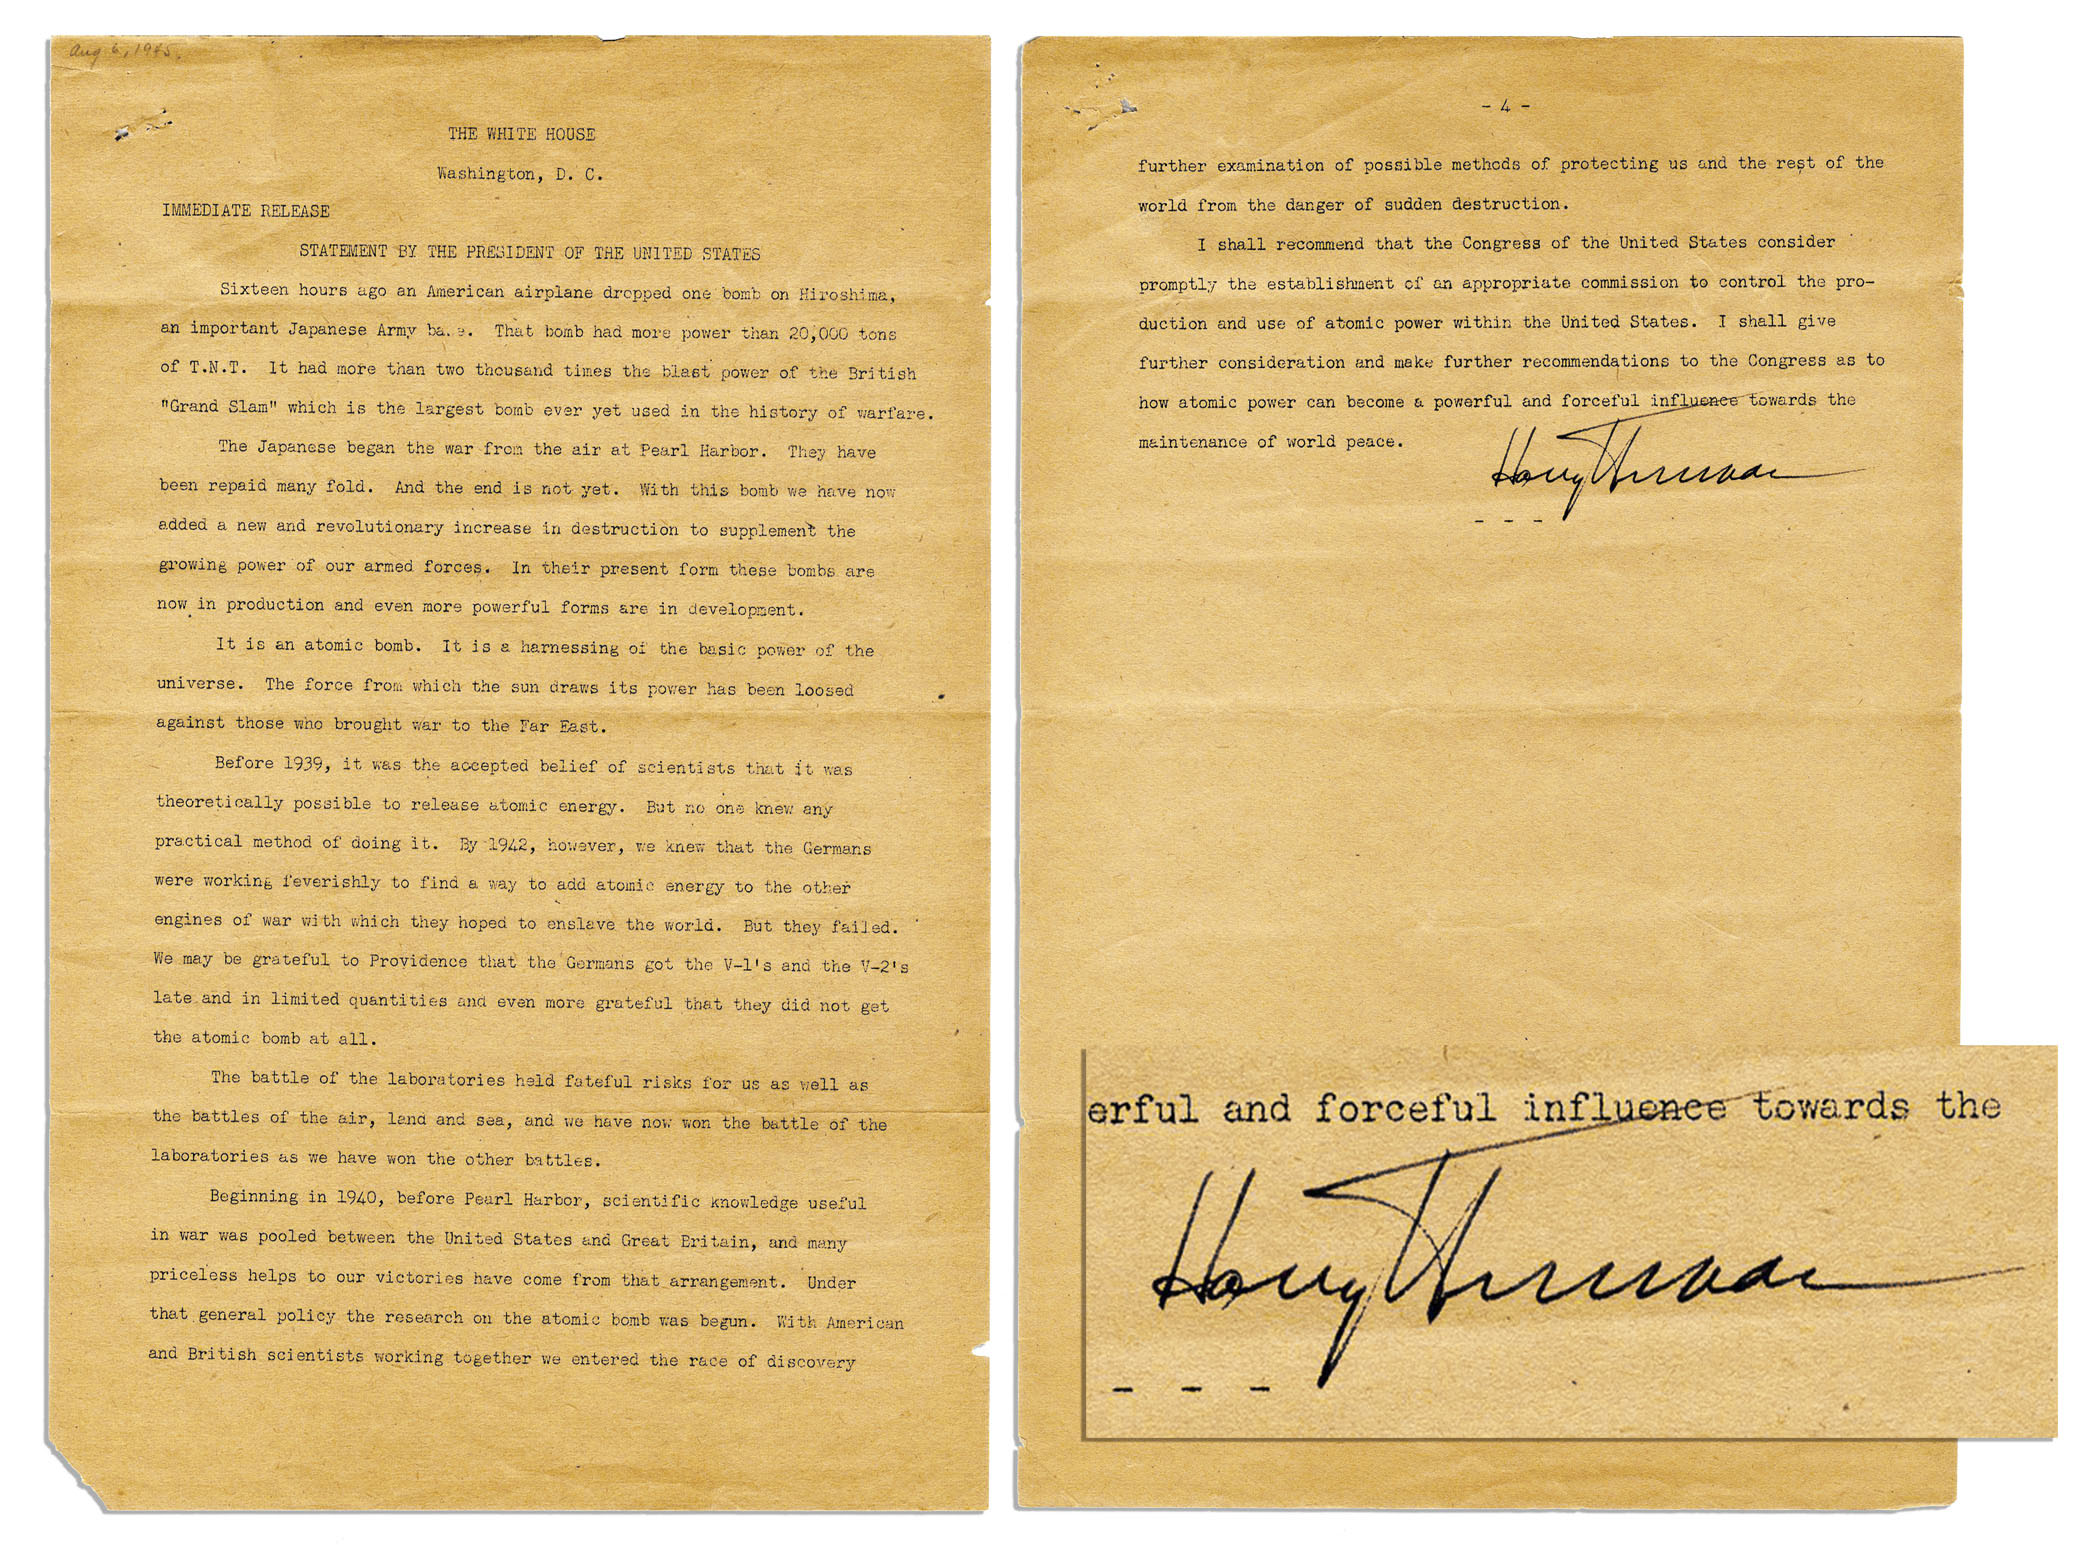 Harry Truman Memorabilia President Harry Truman Signs the Original Press Release Announcing the First Use of Atomic Weaponry -- "…Hiroshima…may expect a rain of ruin from the air…" -- One of Only a Few Extant